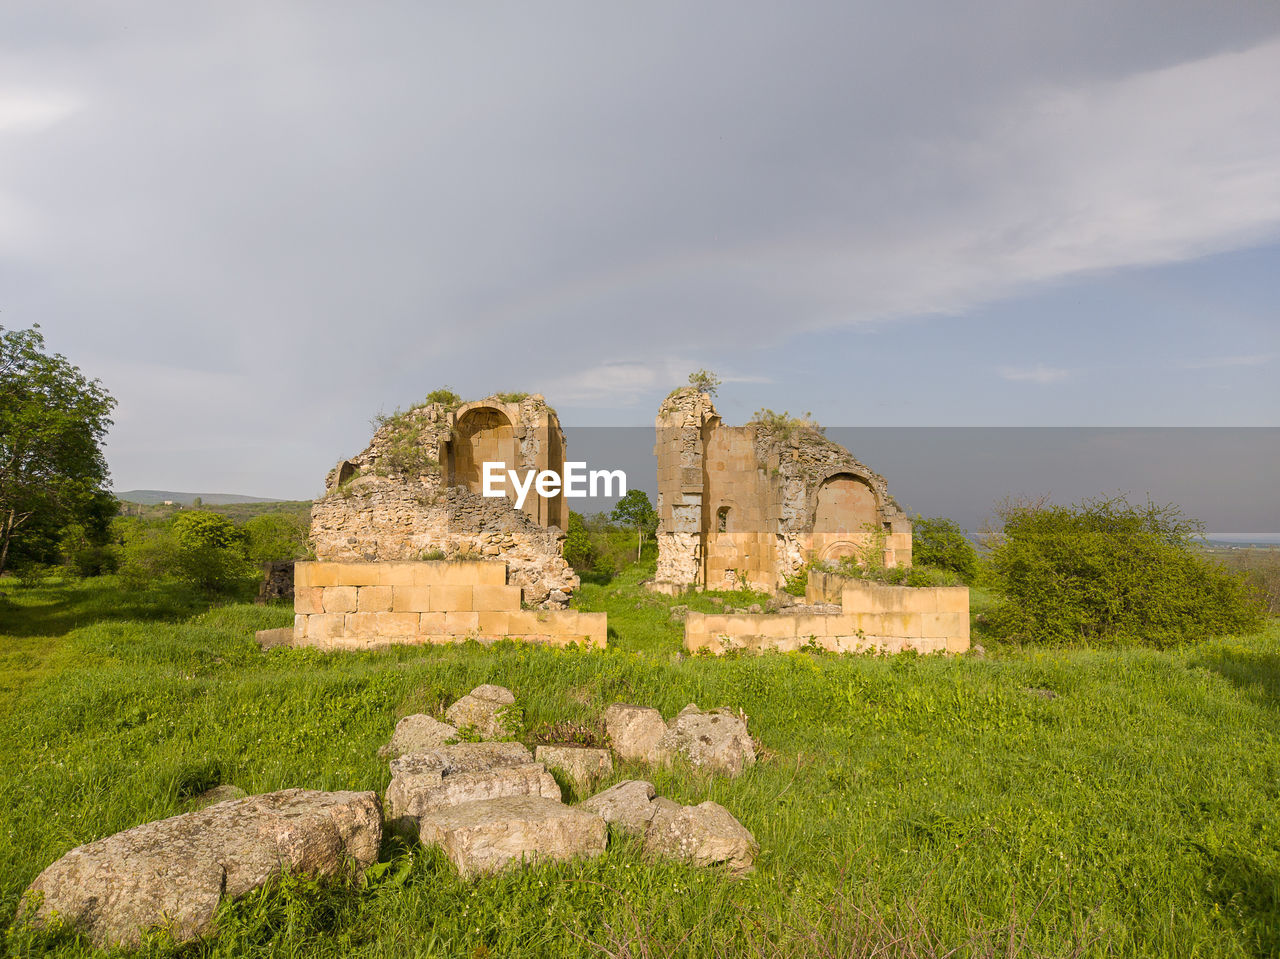 history, the past, ruins, architecture, sky, plant, ancient, old ruin, nature, cloud, grass, travel destinations, built structure, rock, travel, land, no people, building, old, rural area, archaeology, tourism, ruined, stone material, ancient civilization, landscape, fortification, ancient history, outdoors, castle, field, building exterior, environment, day, tree, archaeological site, hill, green, scenics - nature, medieval, tranquility, damaged